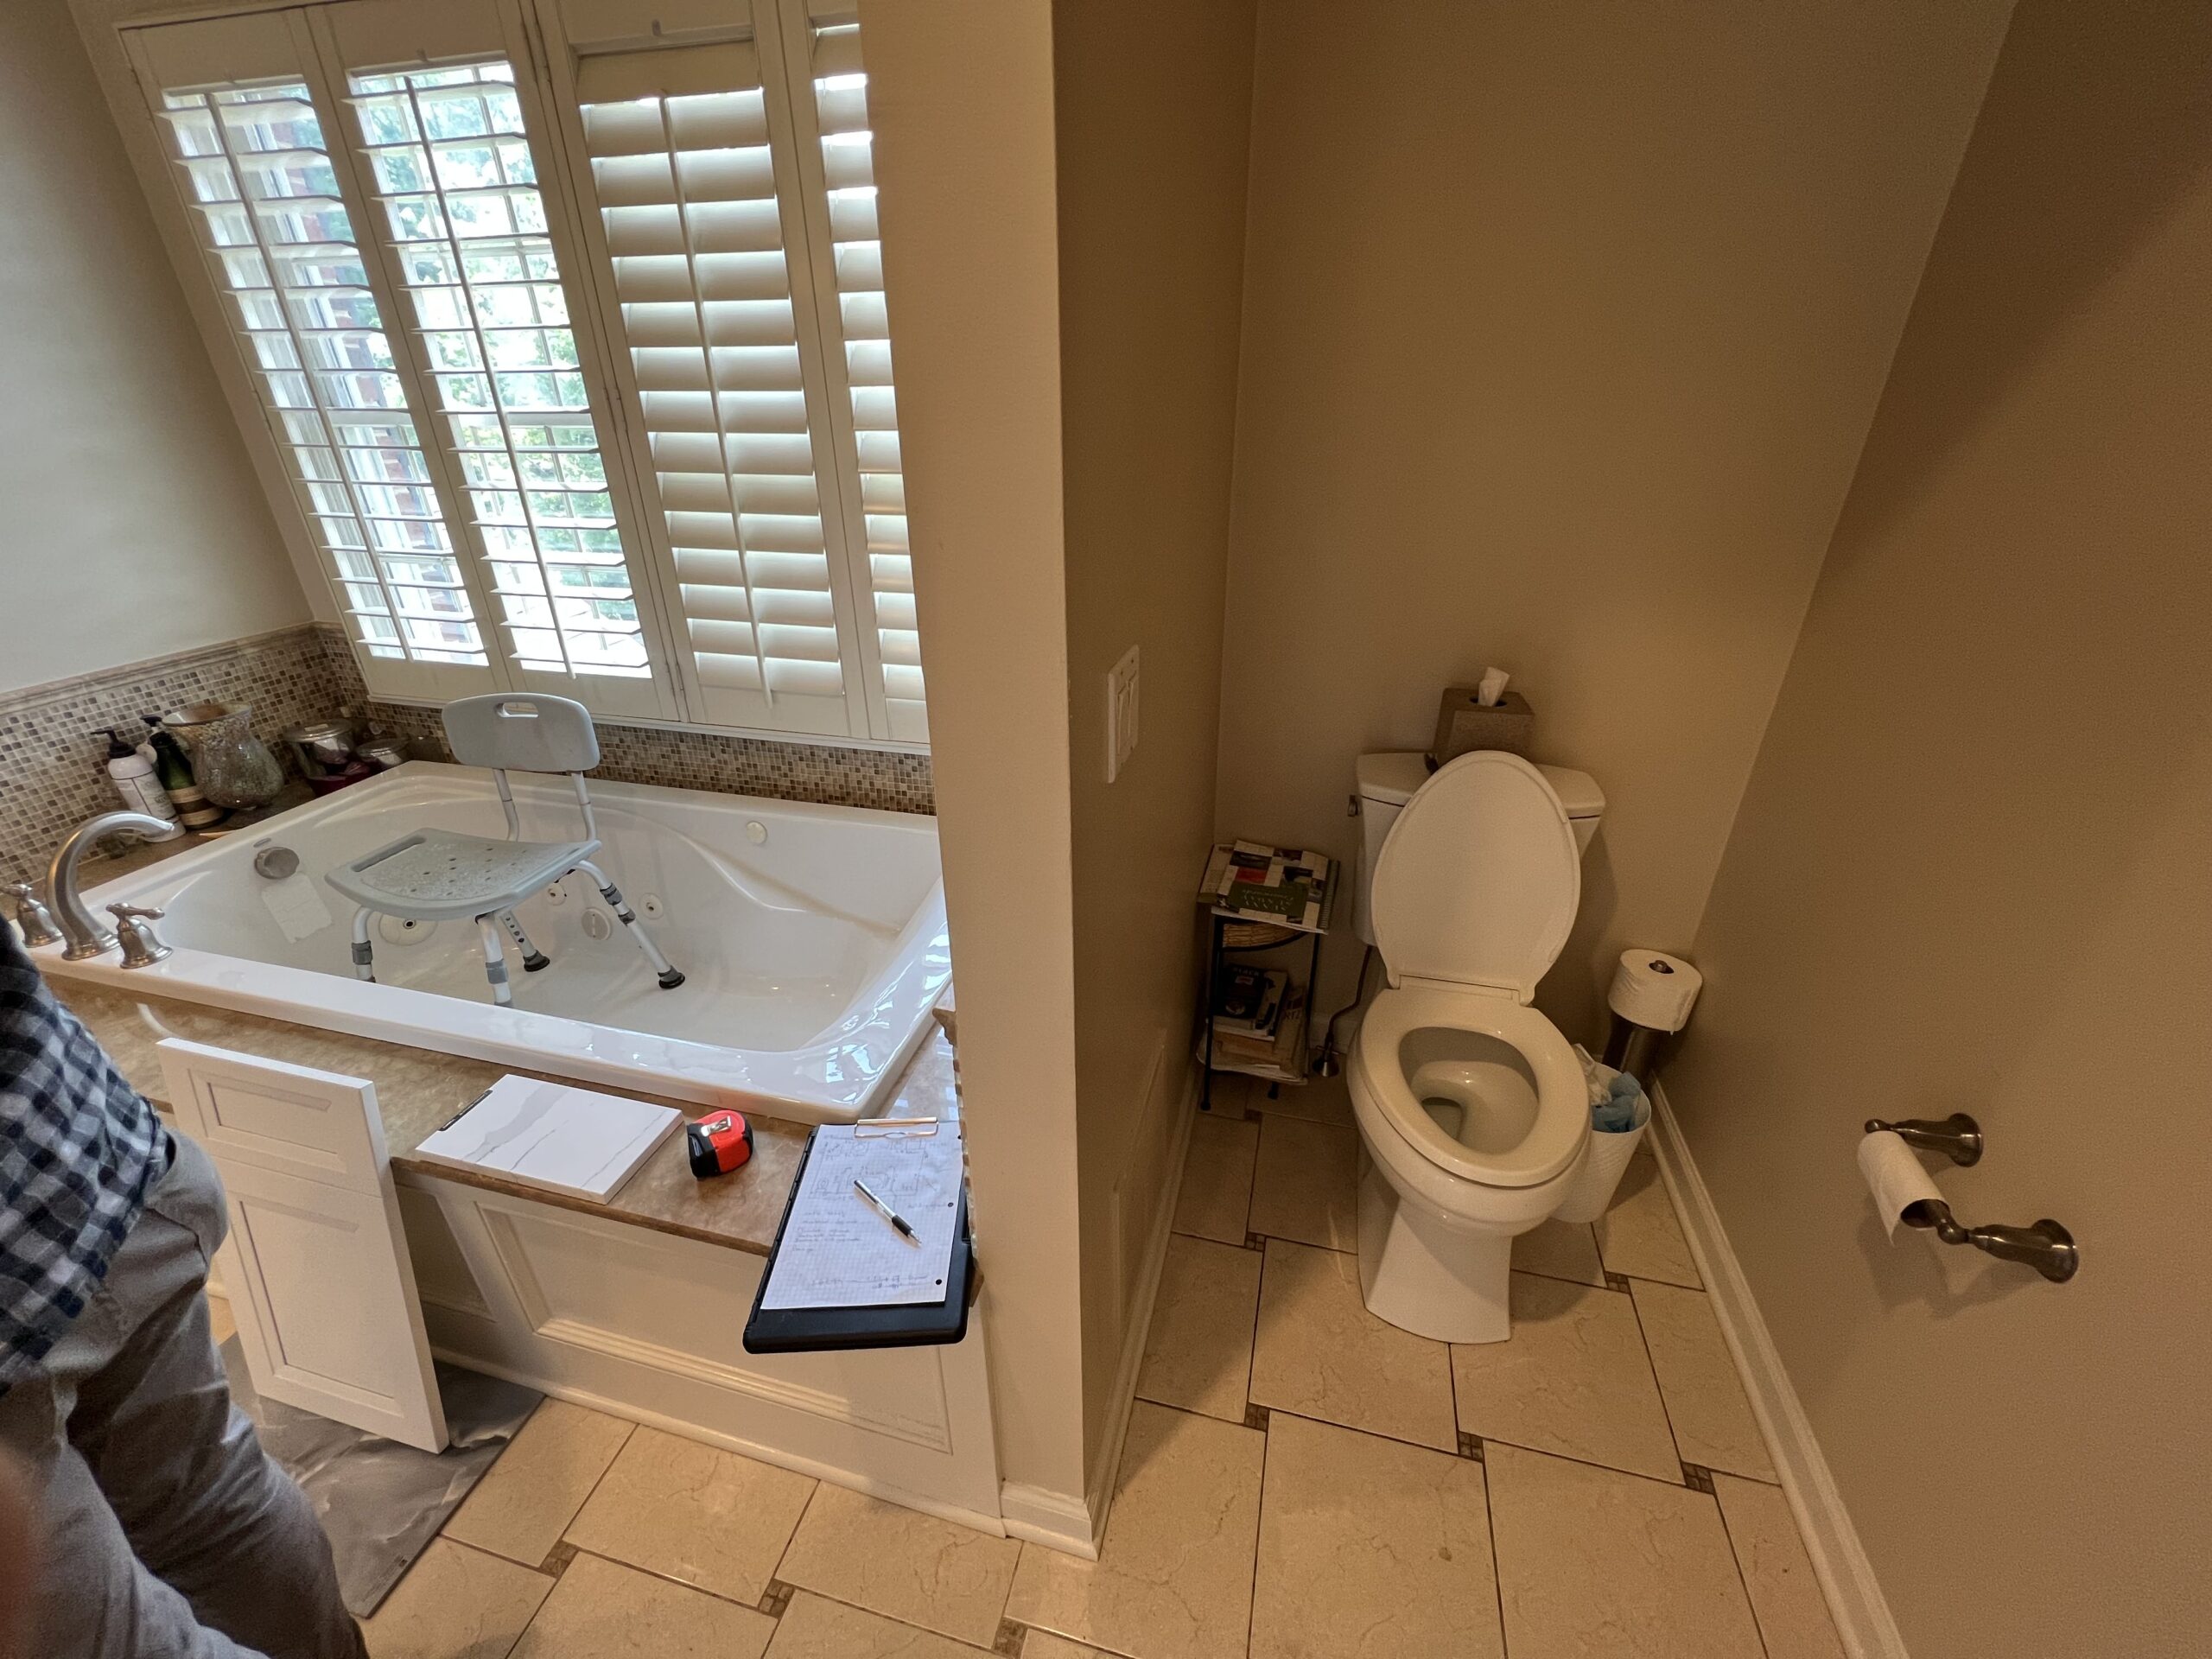 Before remodeling image of toilet and bath tub